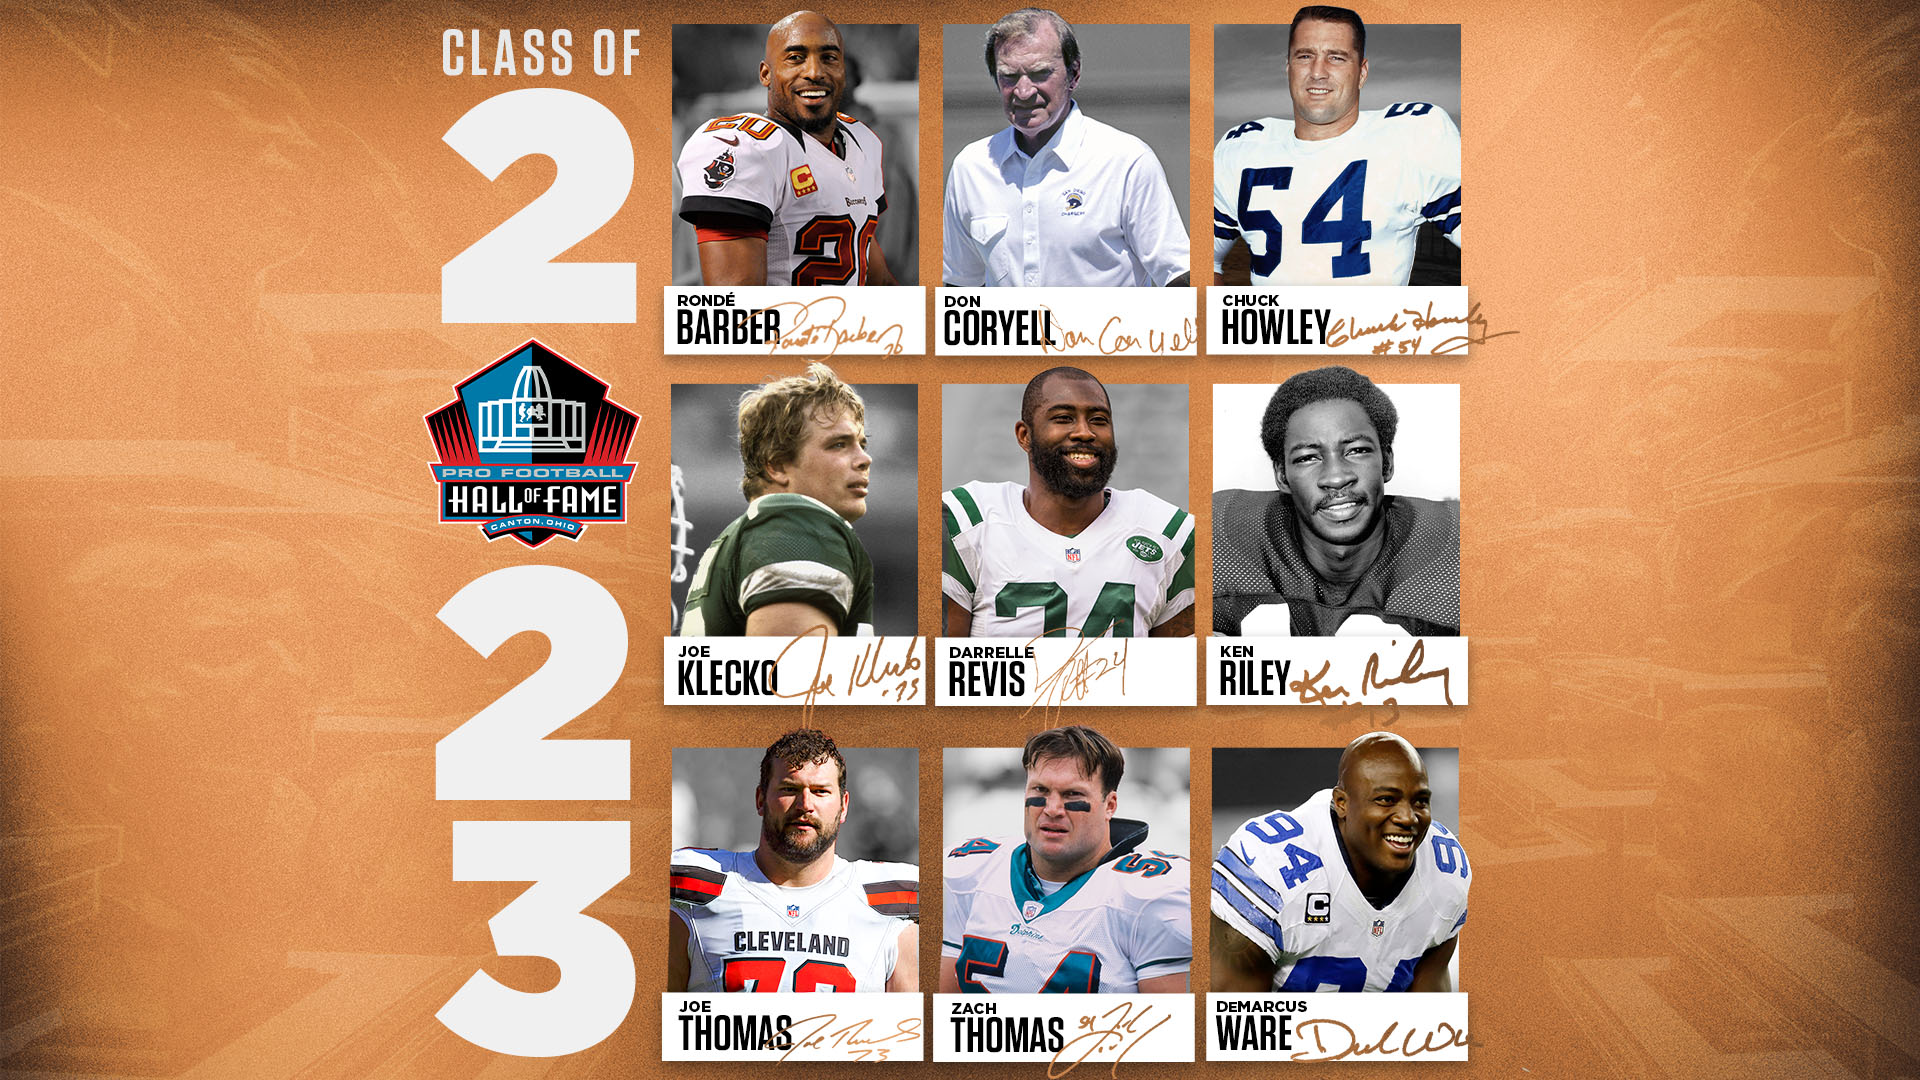 Nine of the “Greatest of the Game” have been elected to the Pro Football Hall of Fame’s Class of 2023.